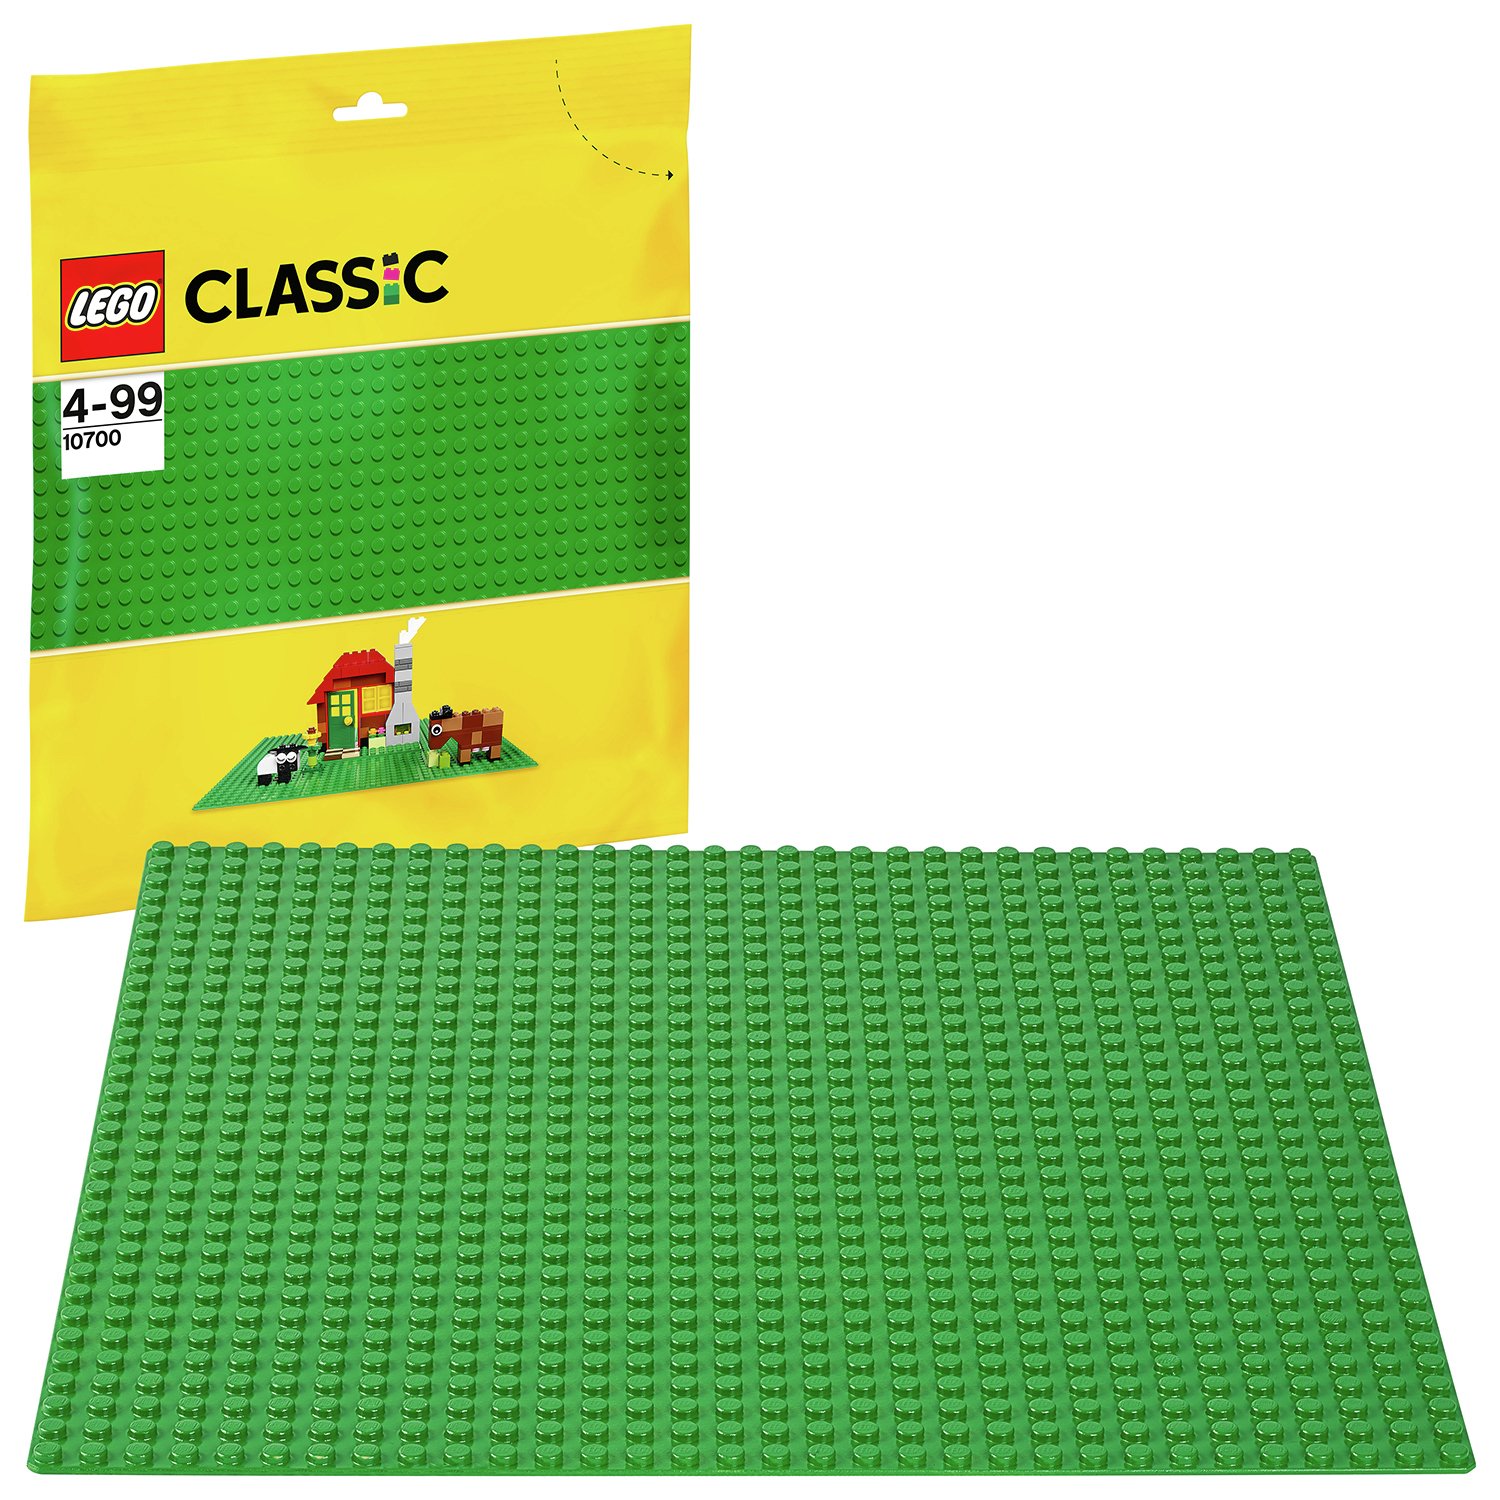 LEGO Classic Base Plate Review